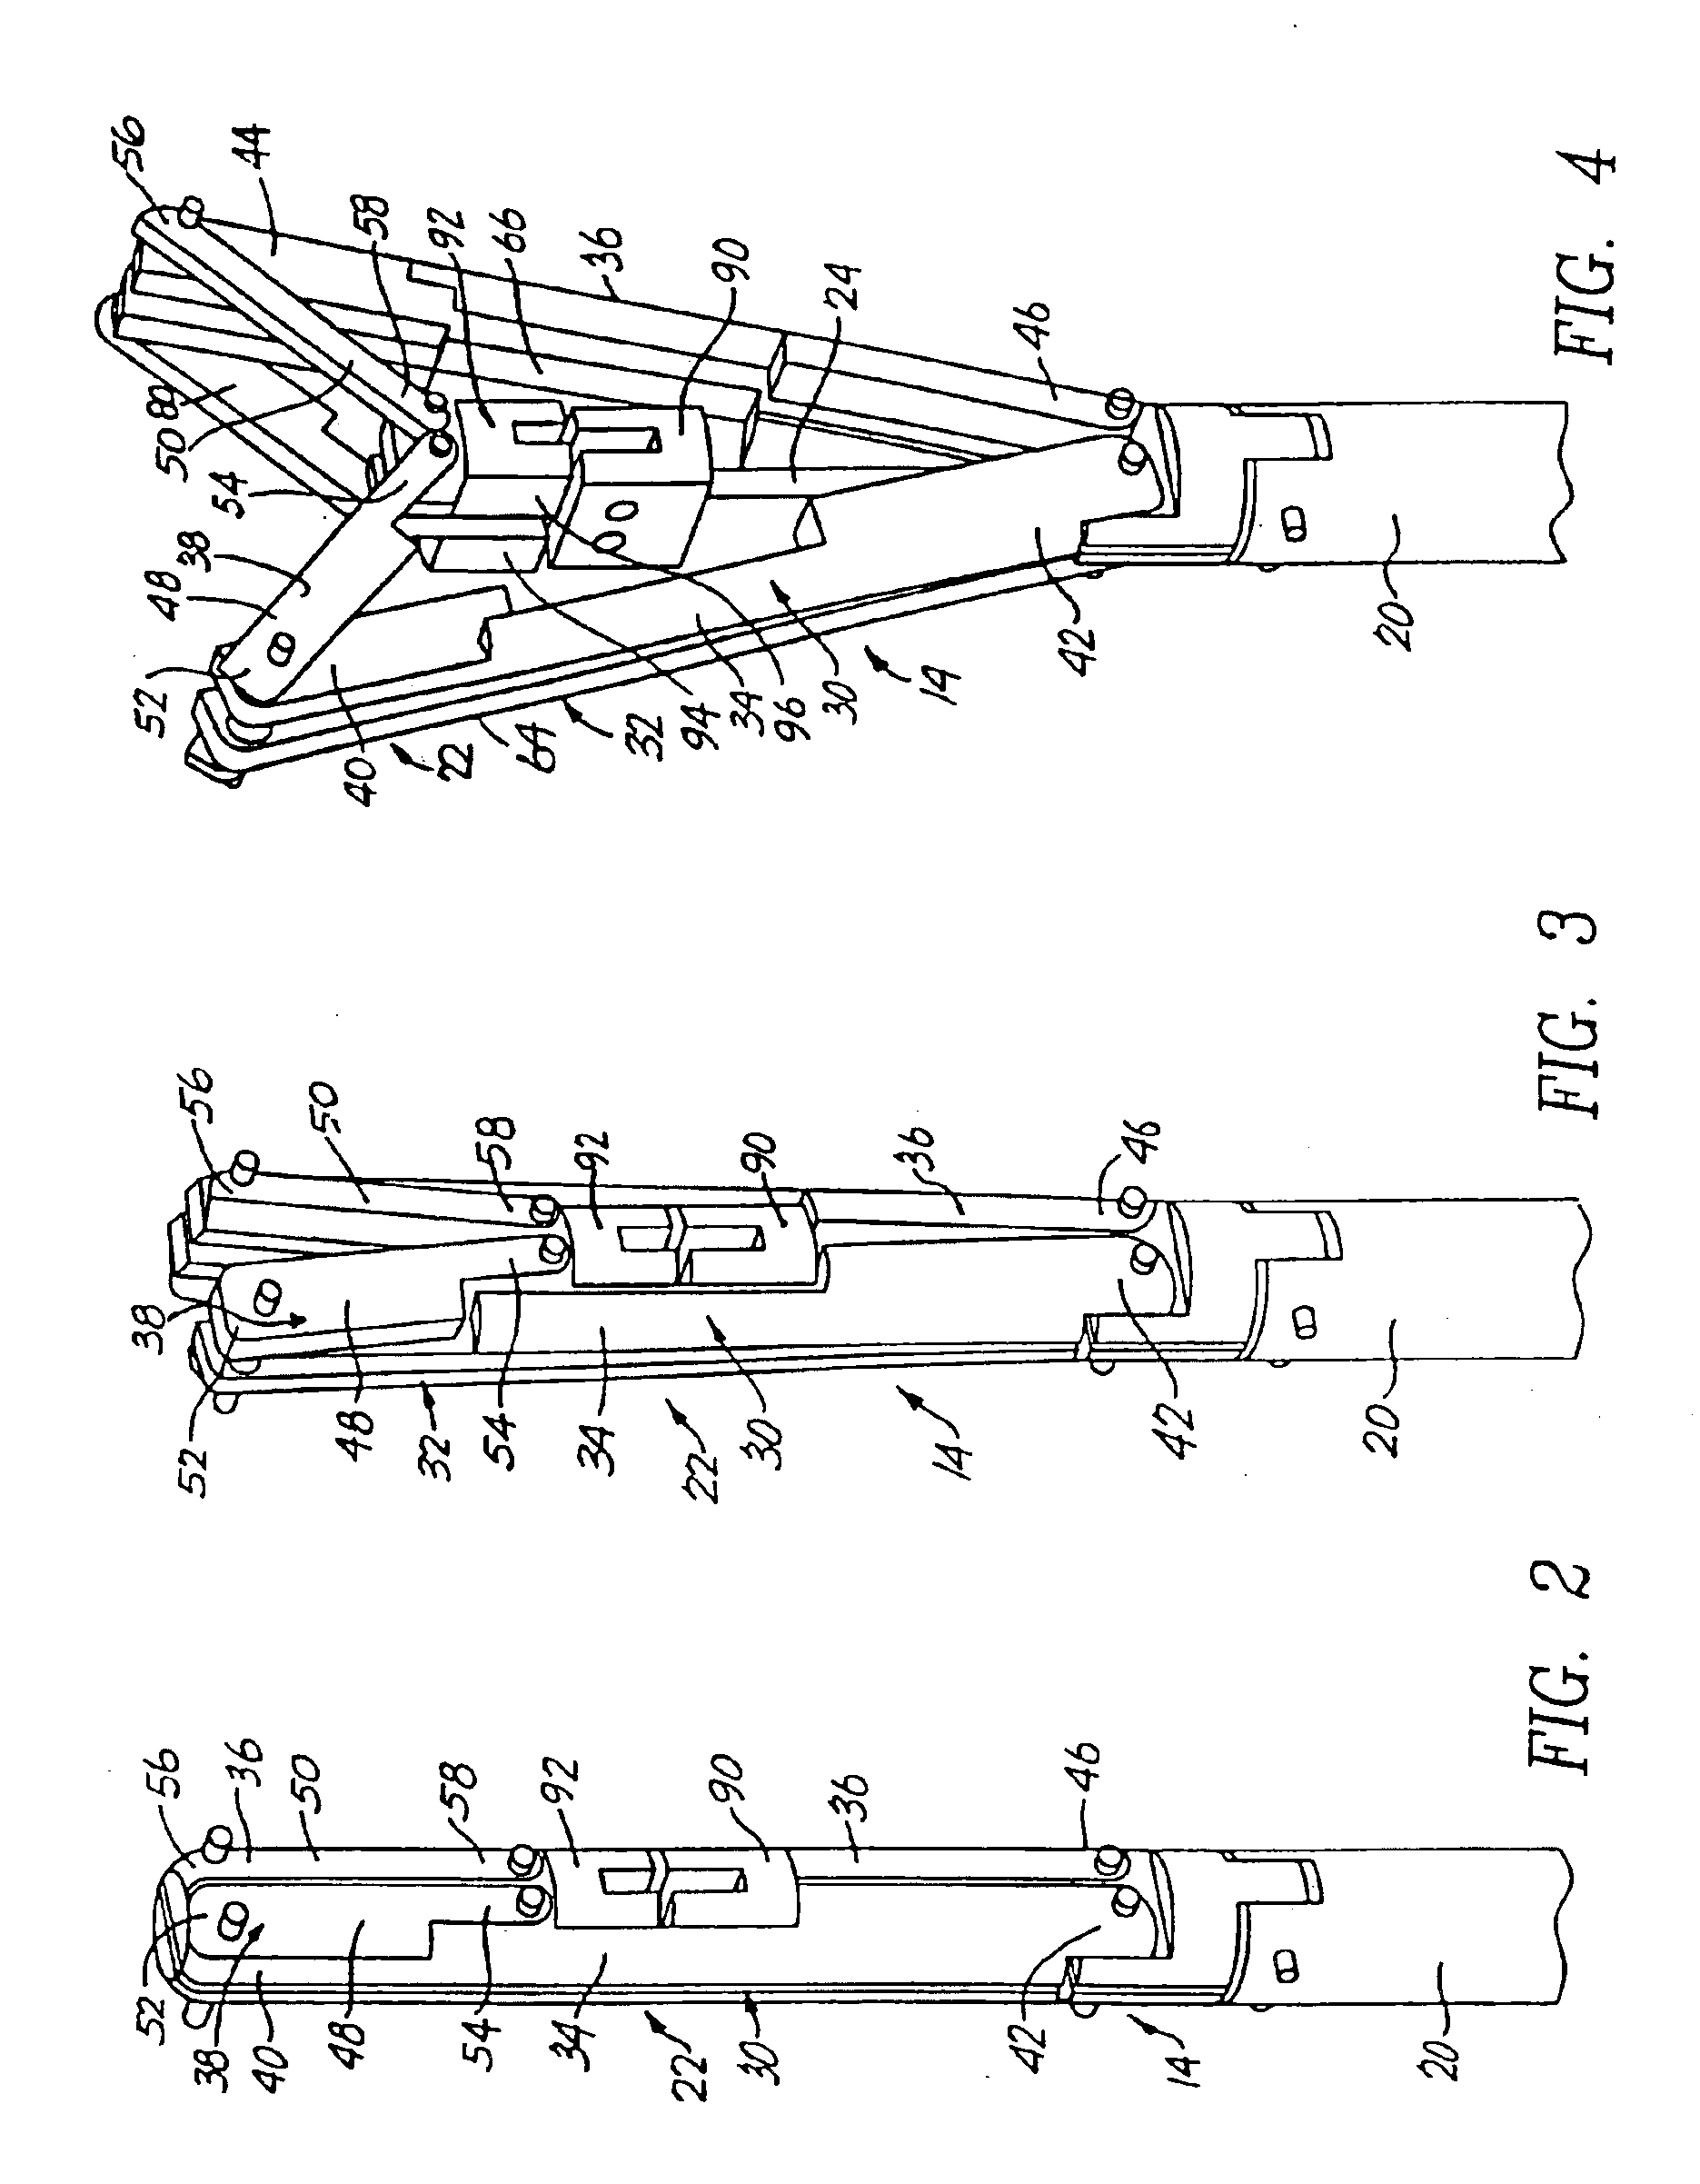 RF device for treating the uterus